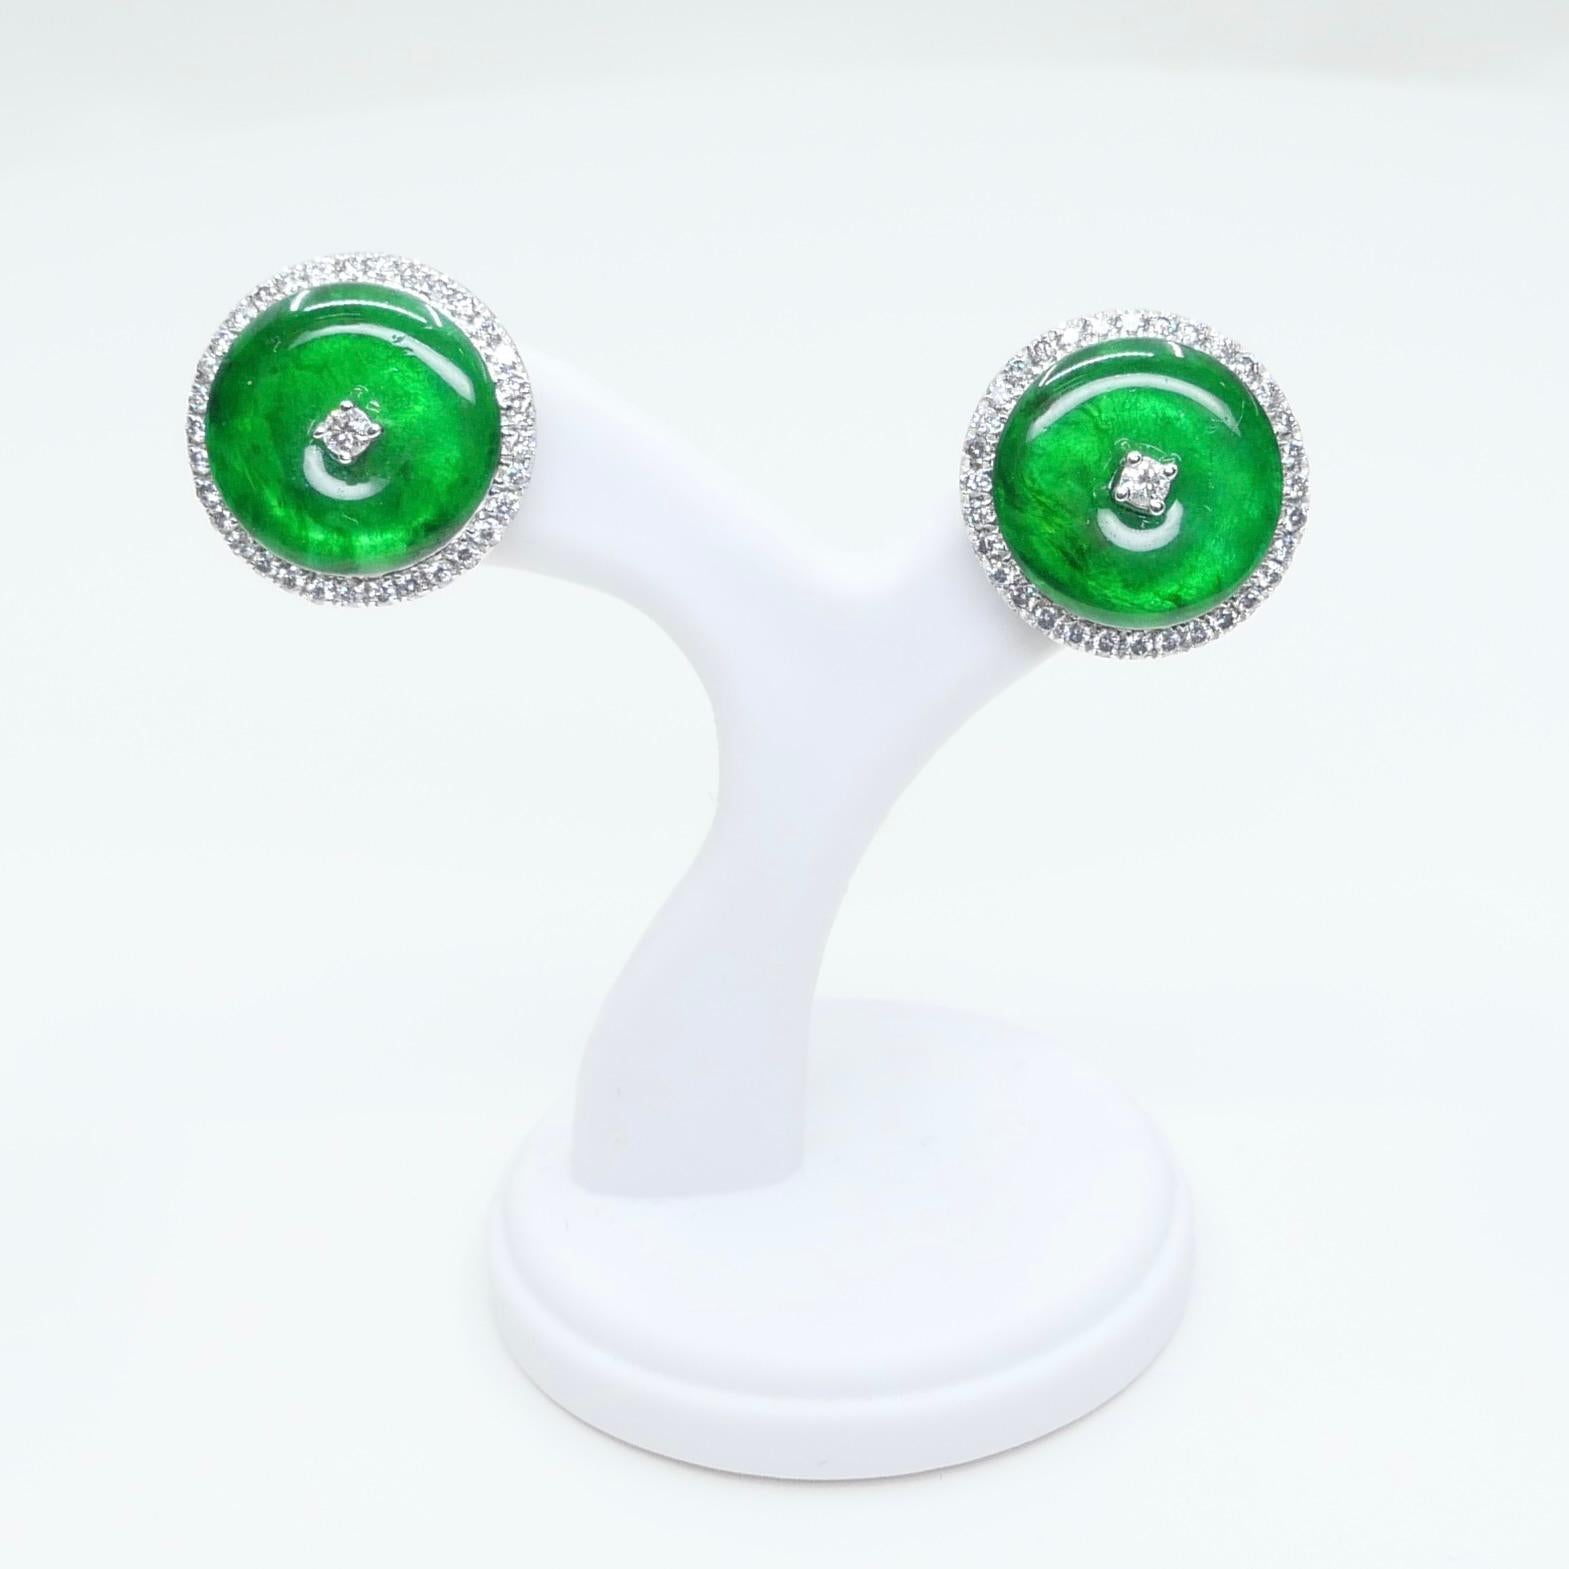 Certified Natural Type A Jadeite Jade And Diamond Earrings. Apple Green Color 6